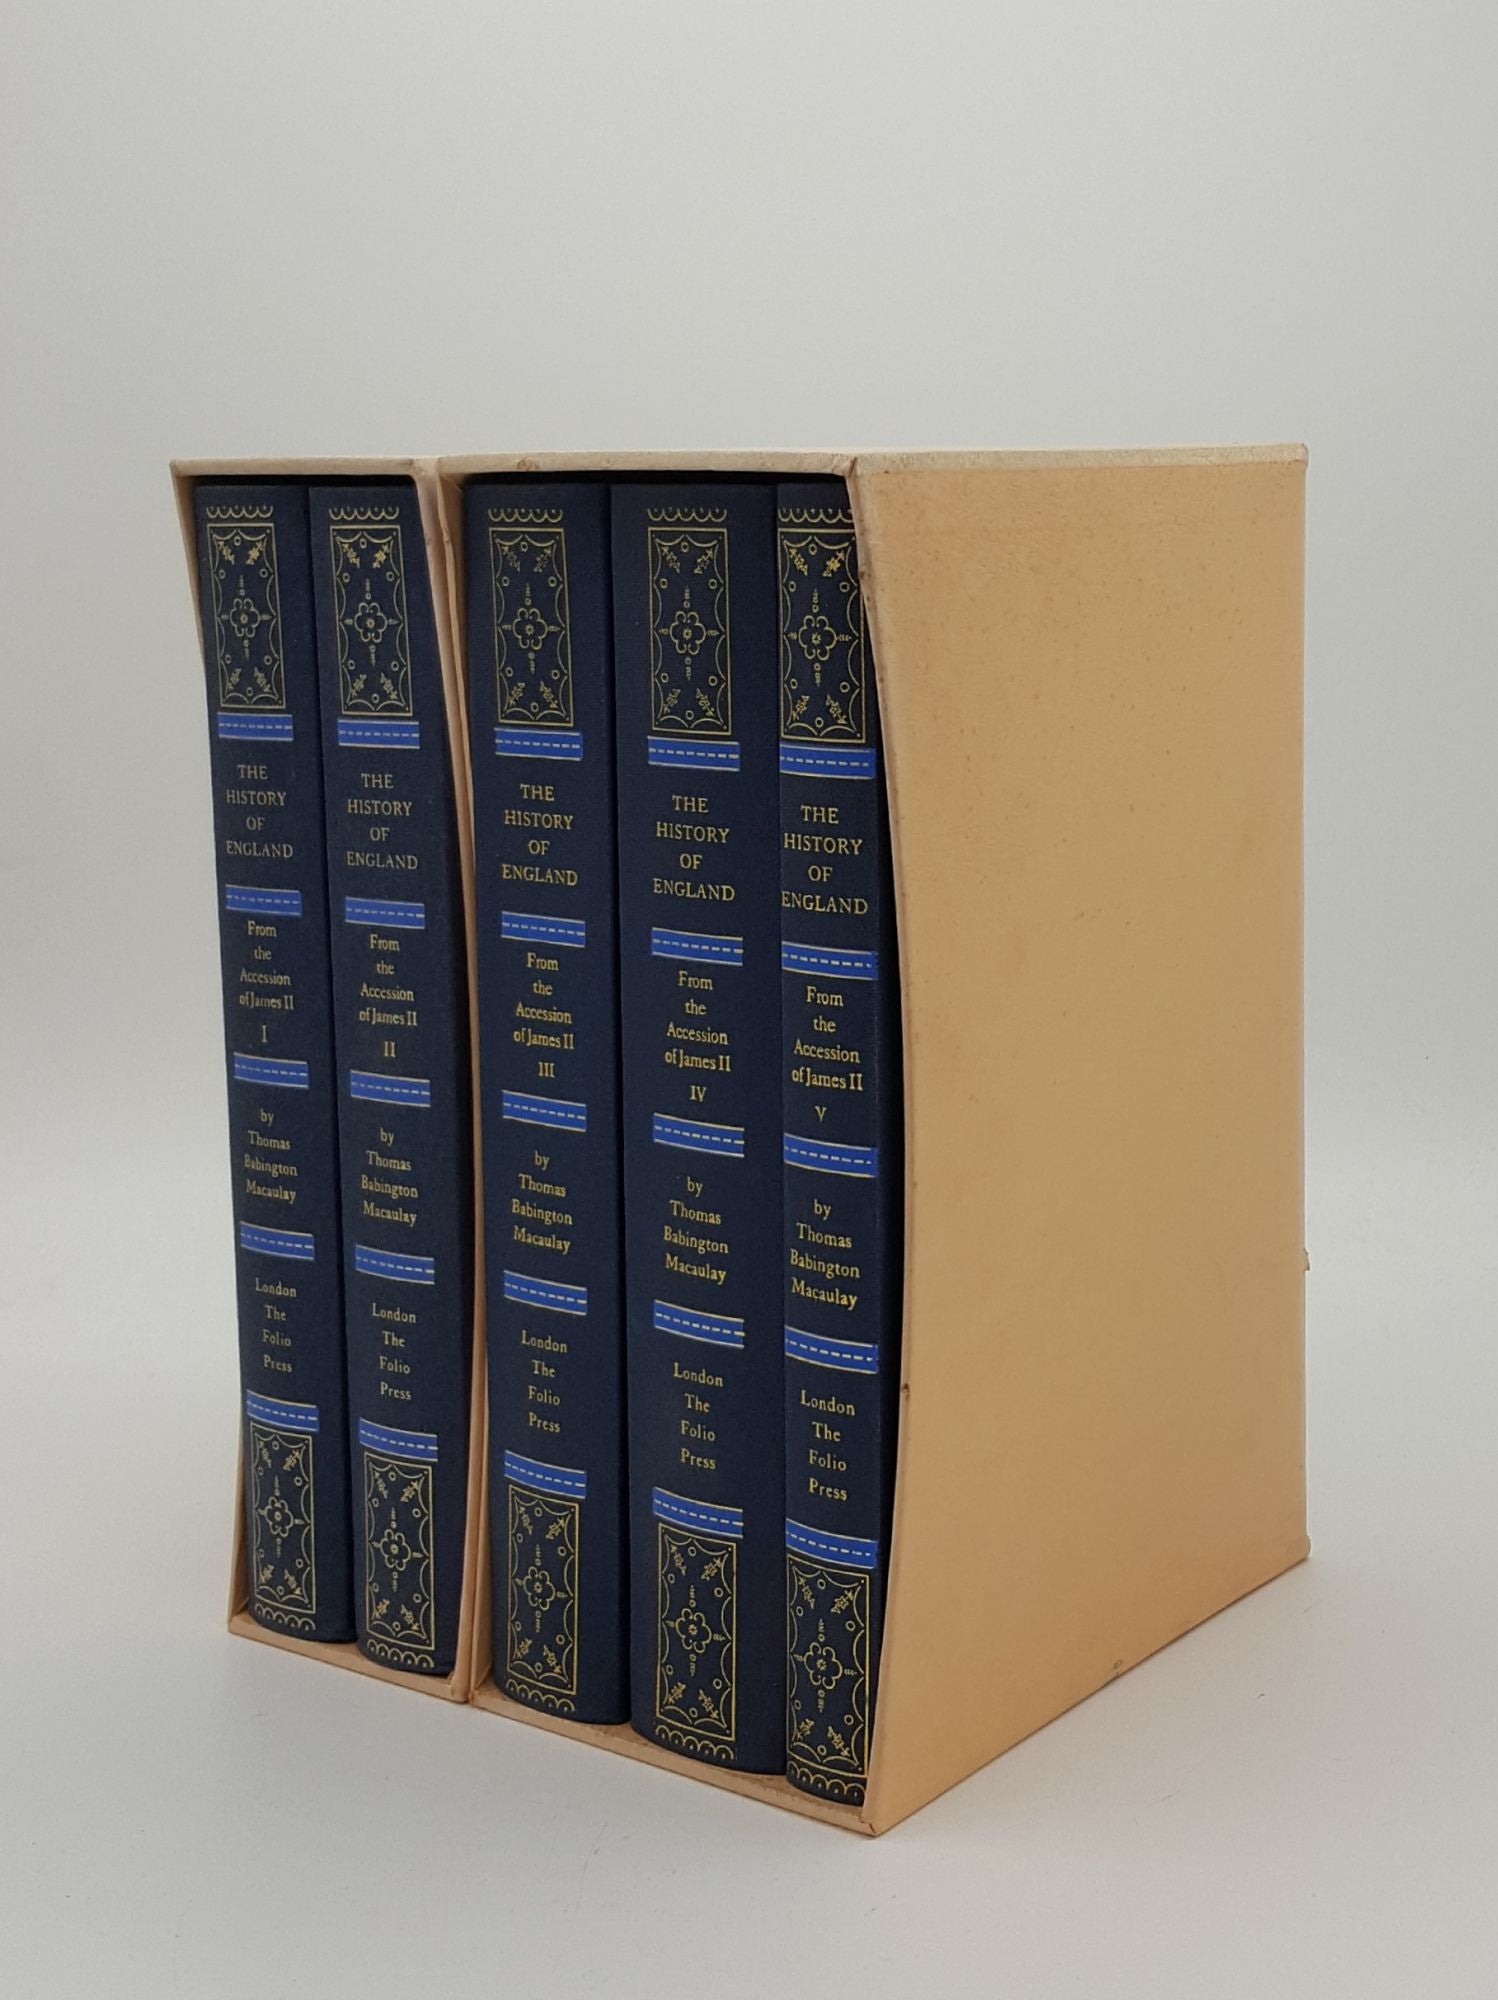 MACAULAY Thomas Babington, ROWLAND Peter - The History of England from the Accession of James II in Five Volumes